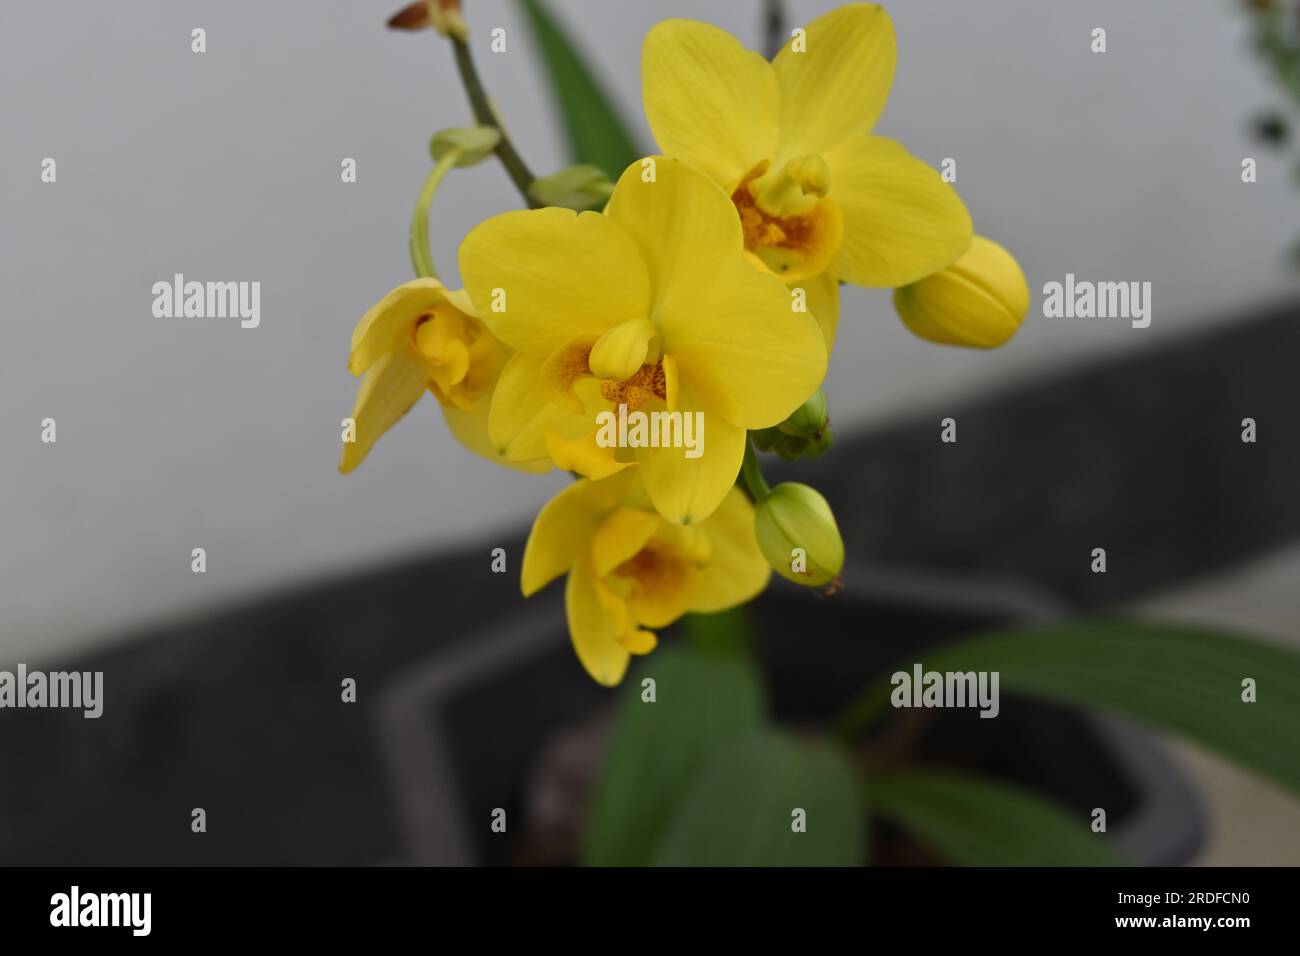 Close up view of a yellow color ground orchid flower (Spathoglottis Kimballiana), the orchid flowers bloomed as a cluster on a pot in the home garden Stock Photo